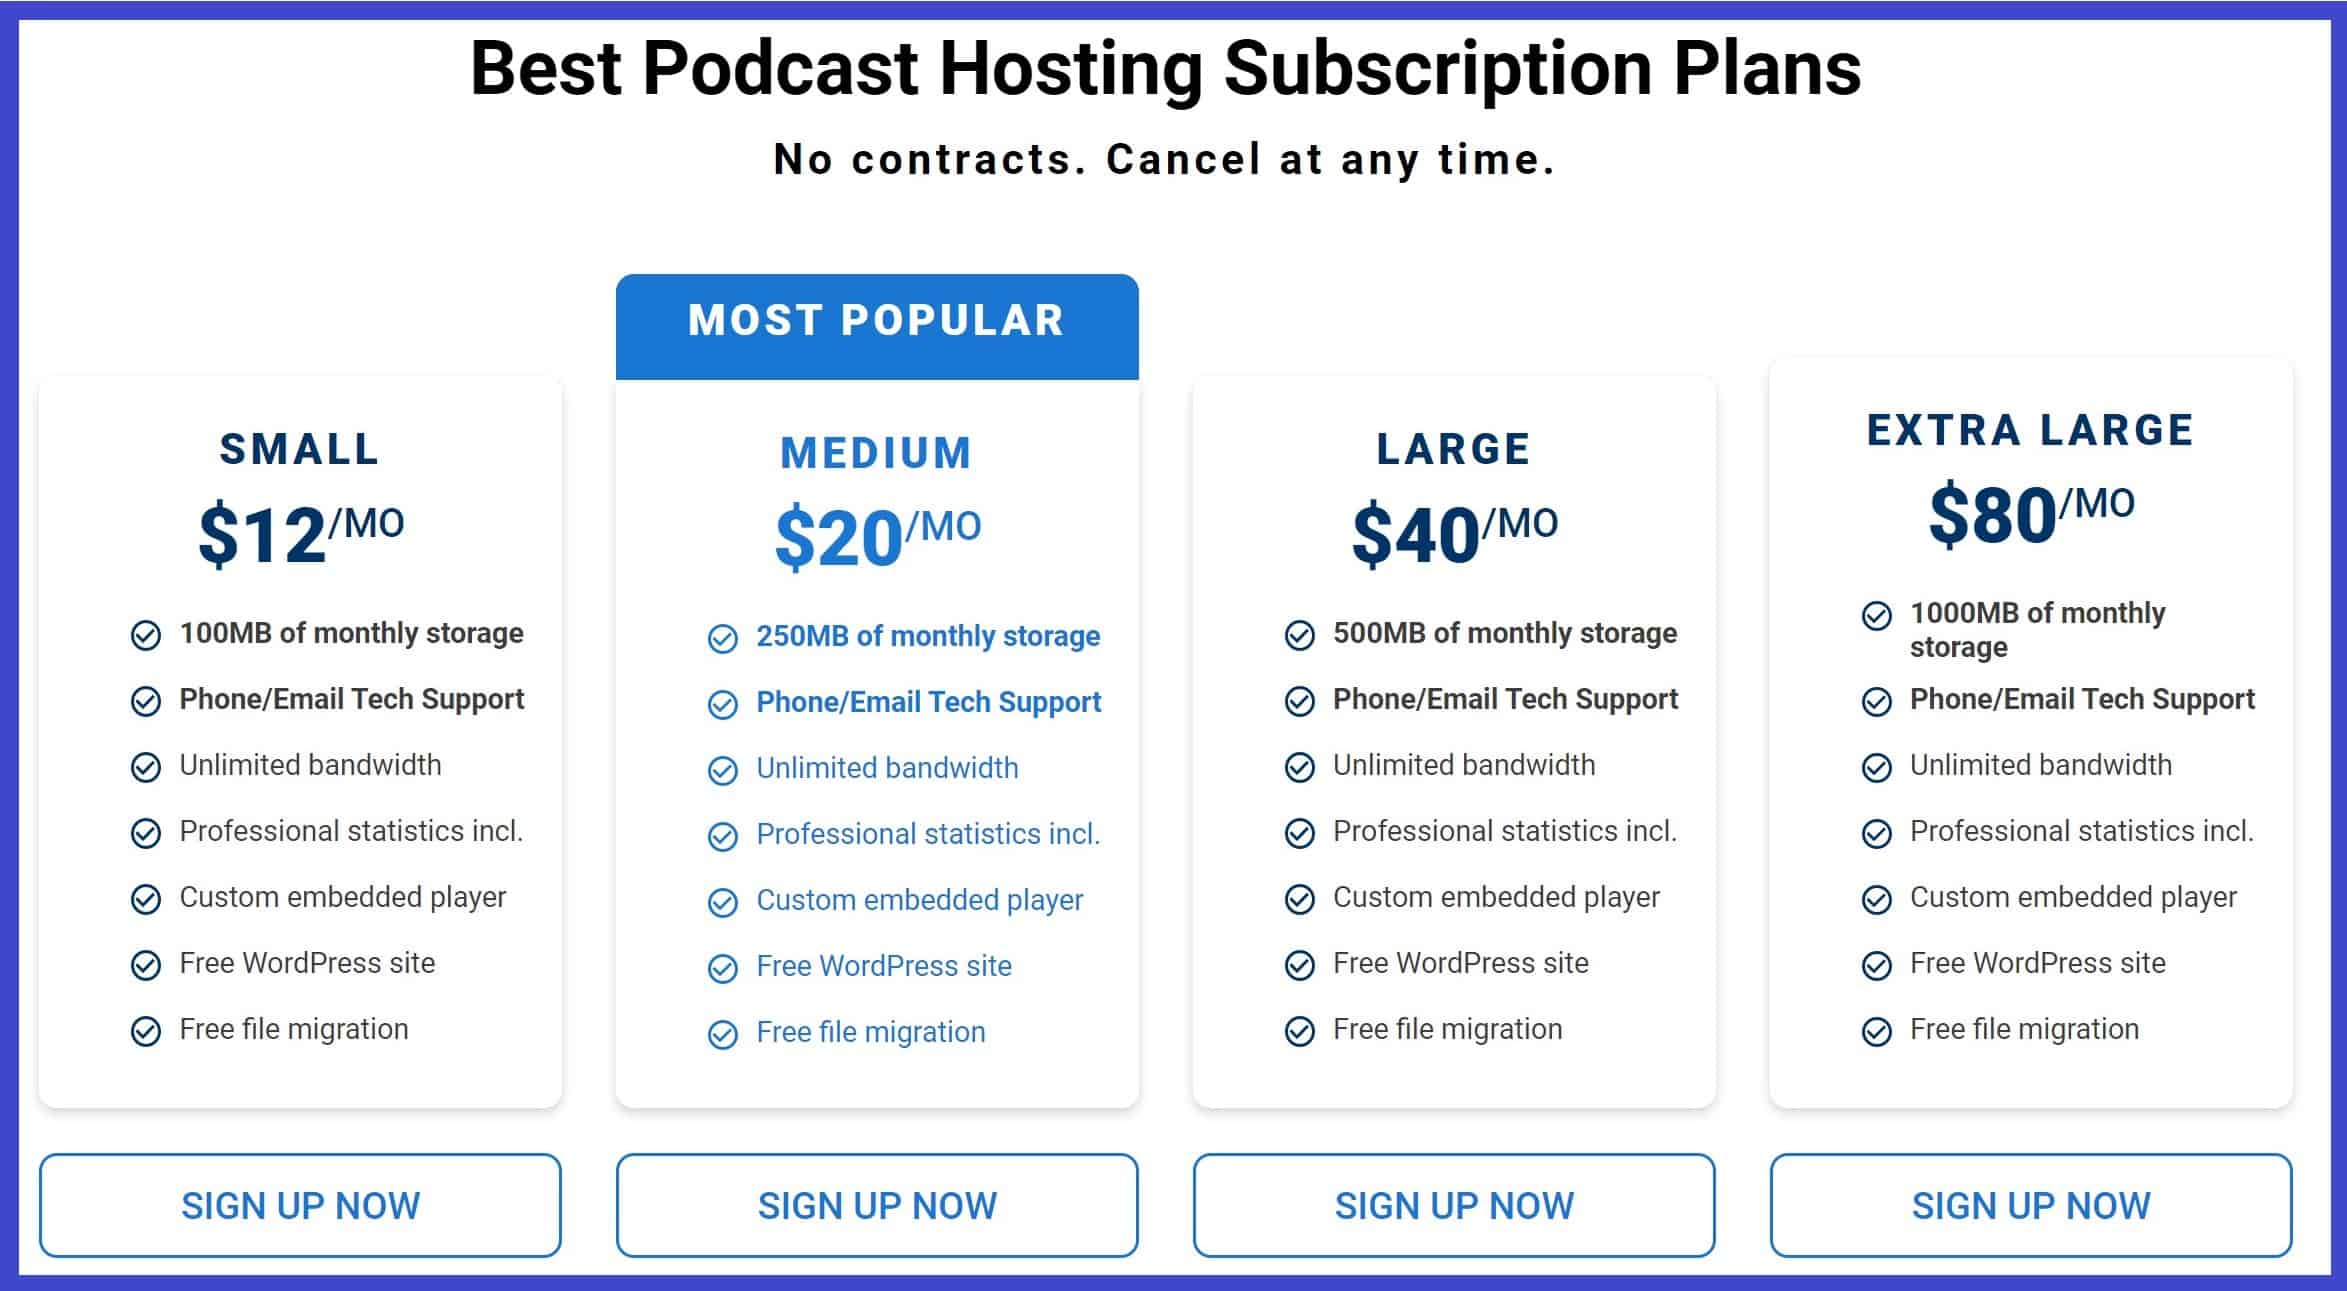 bluebrry subscription plans